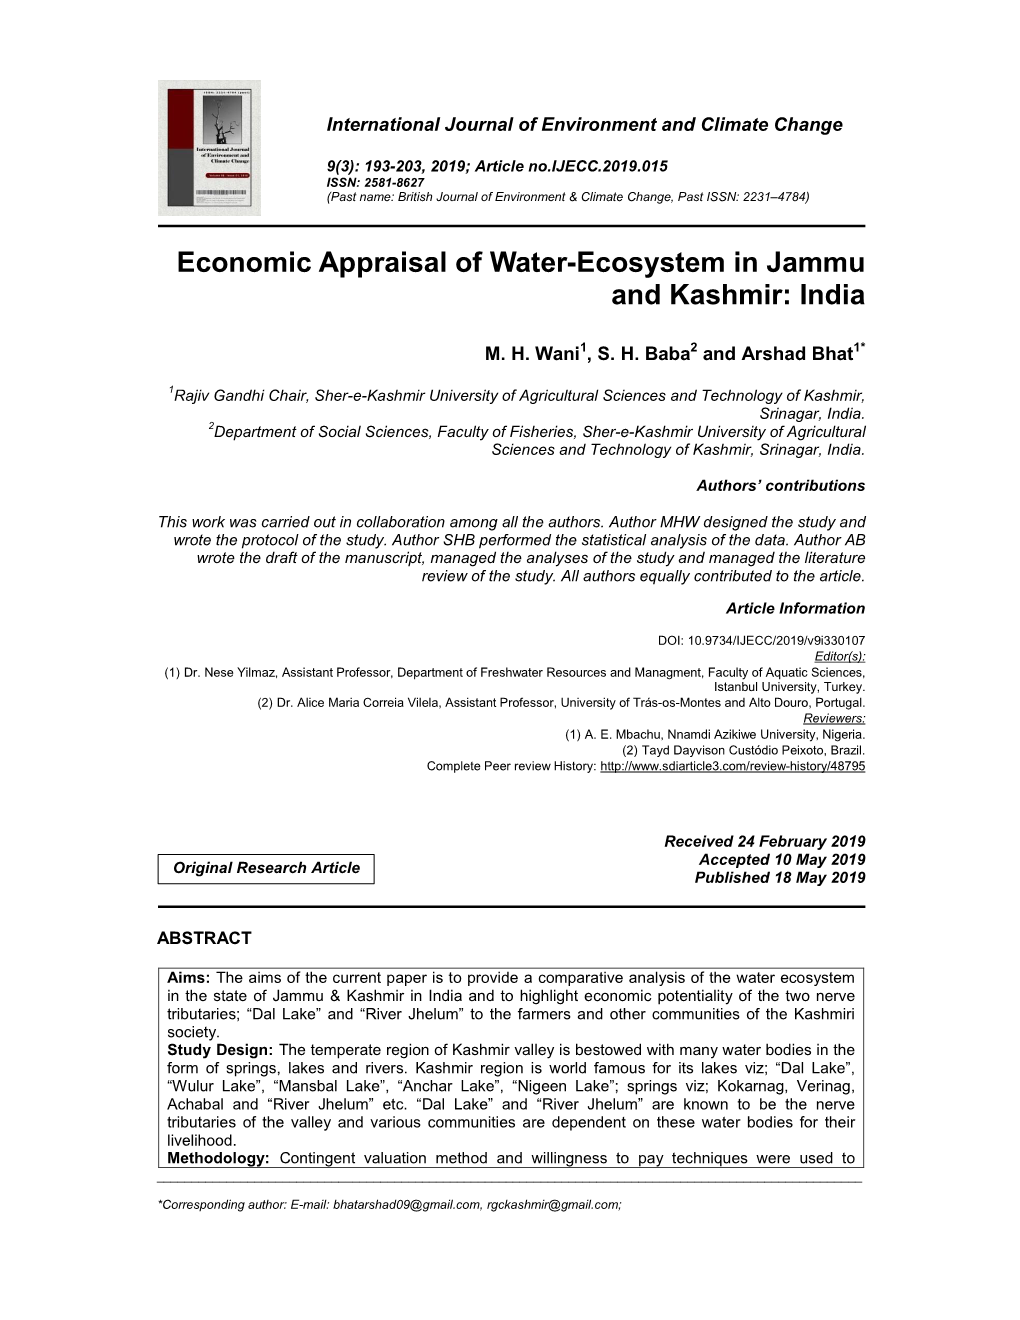 Economic Appraisal of Water-Ecosystem in Jammu and Kashmir: India